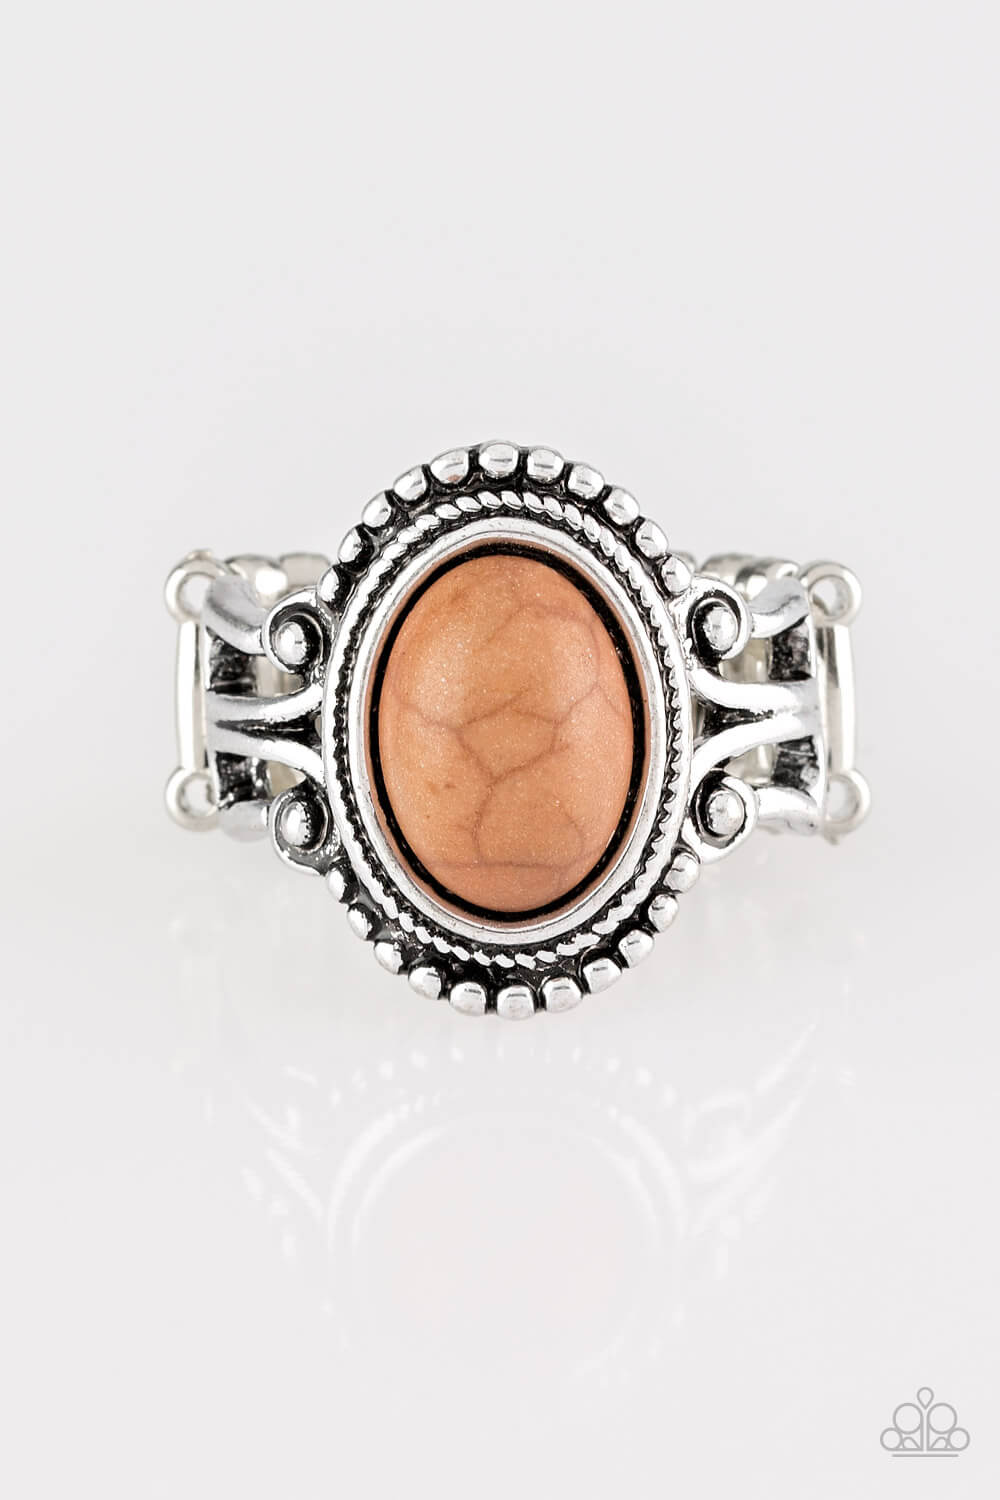 All The Worlds A STAGECOACH - Brown Stone Ring - Princess Glam Shop